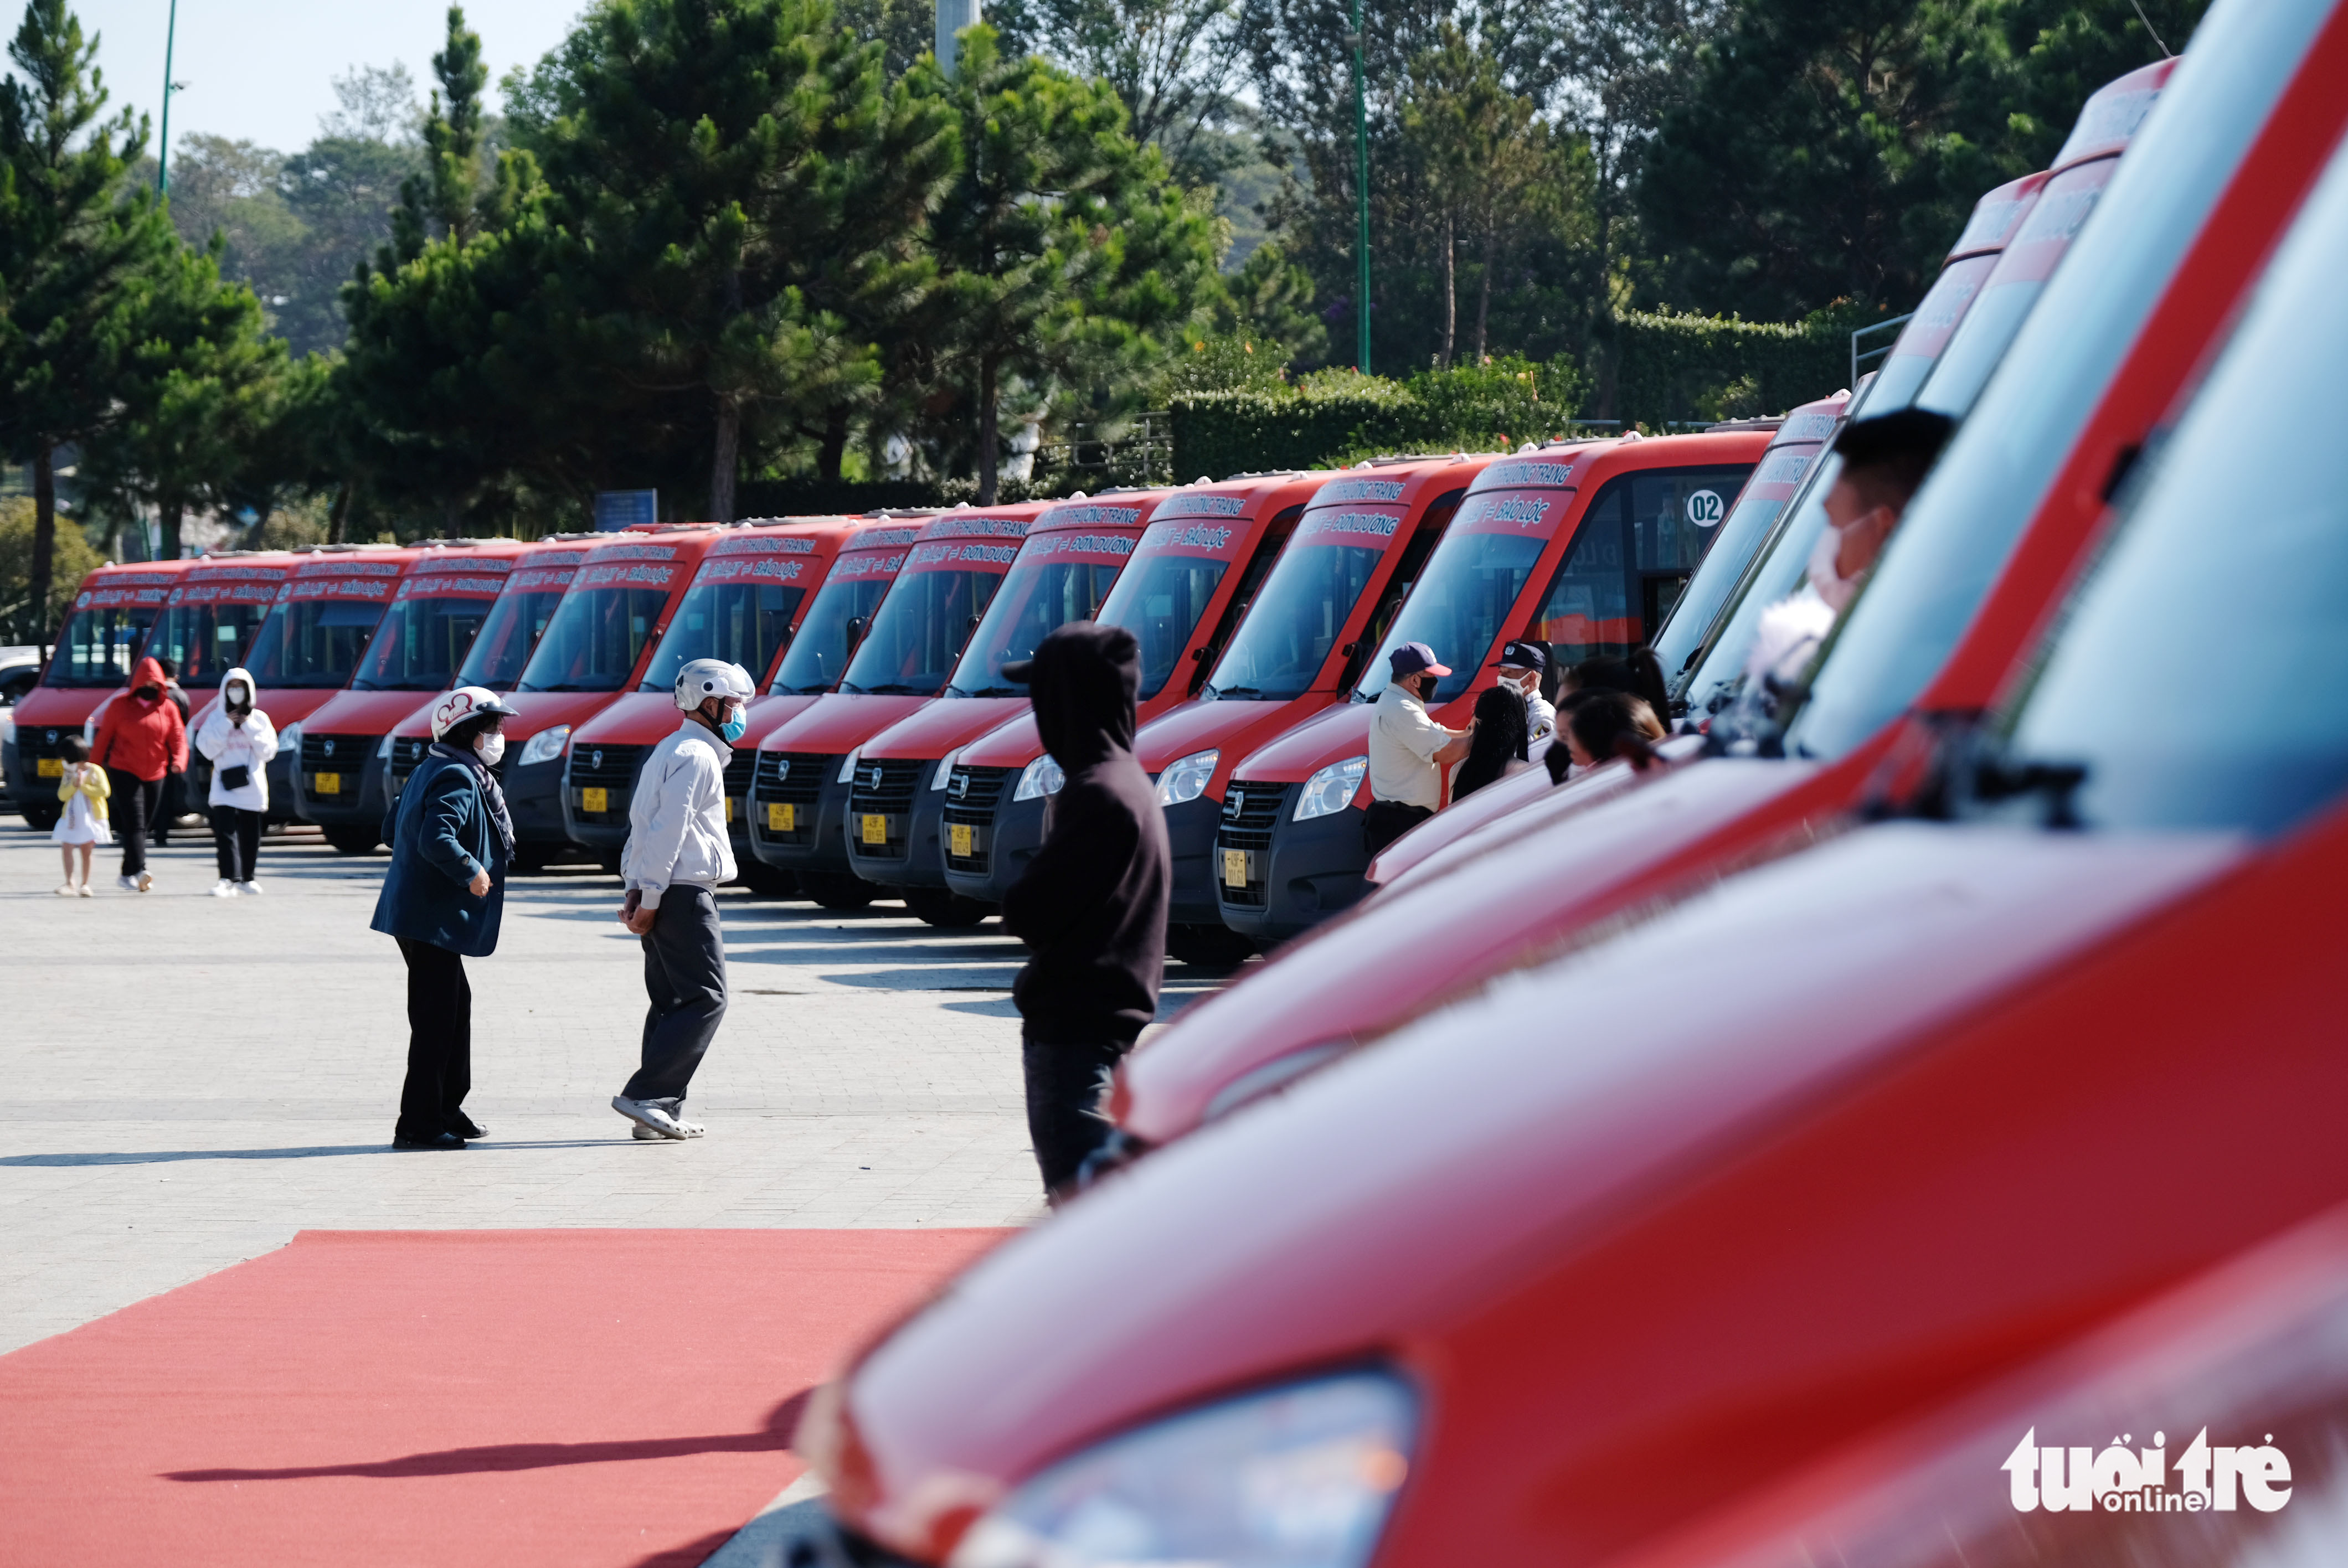 Futa Bus Lines JSC’s new minibuses are introduced in Da Lat City, Lam Dong Province, January 24, 2022. Photo: M. Vinh / Tuoi Tre